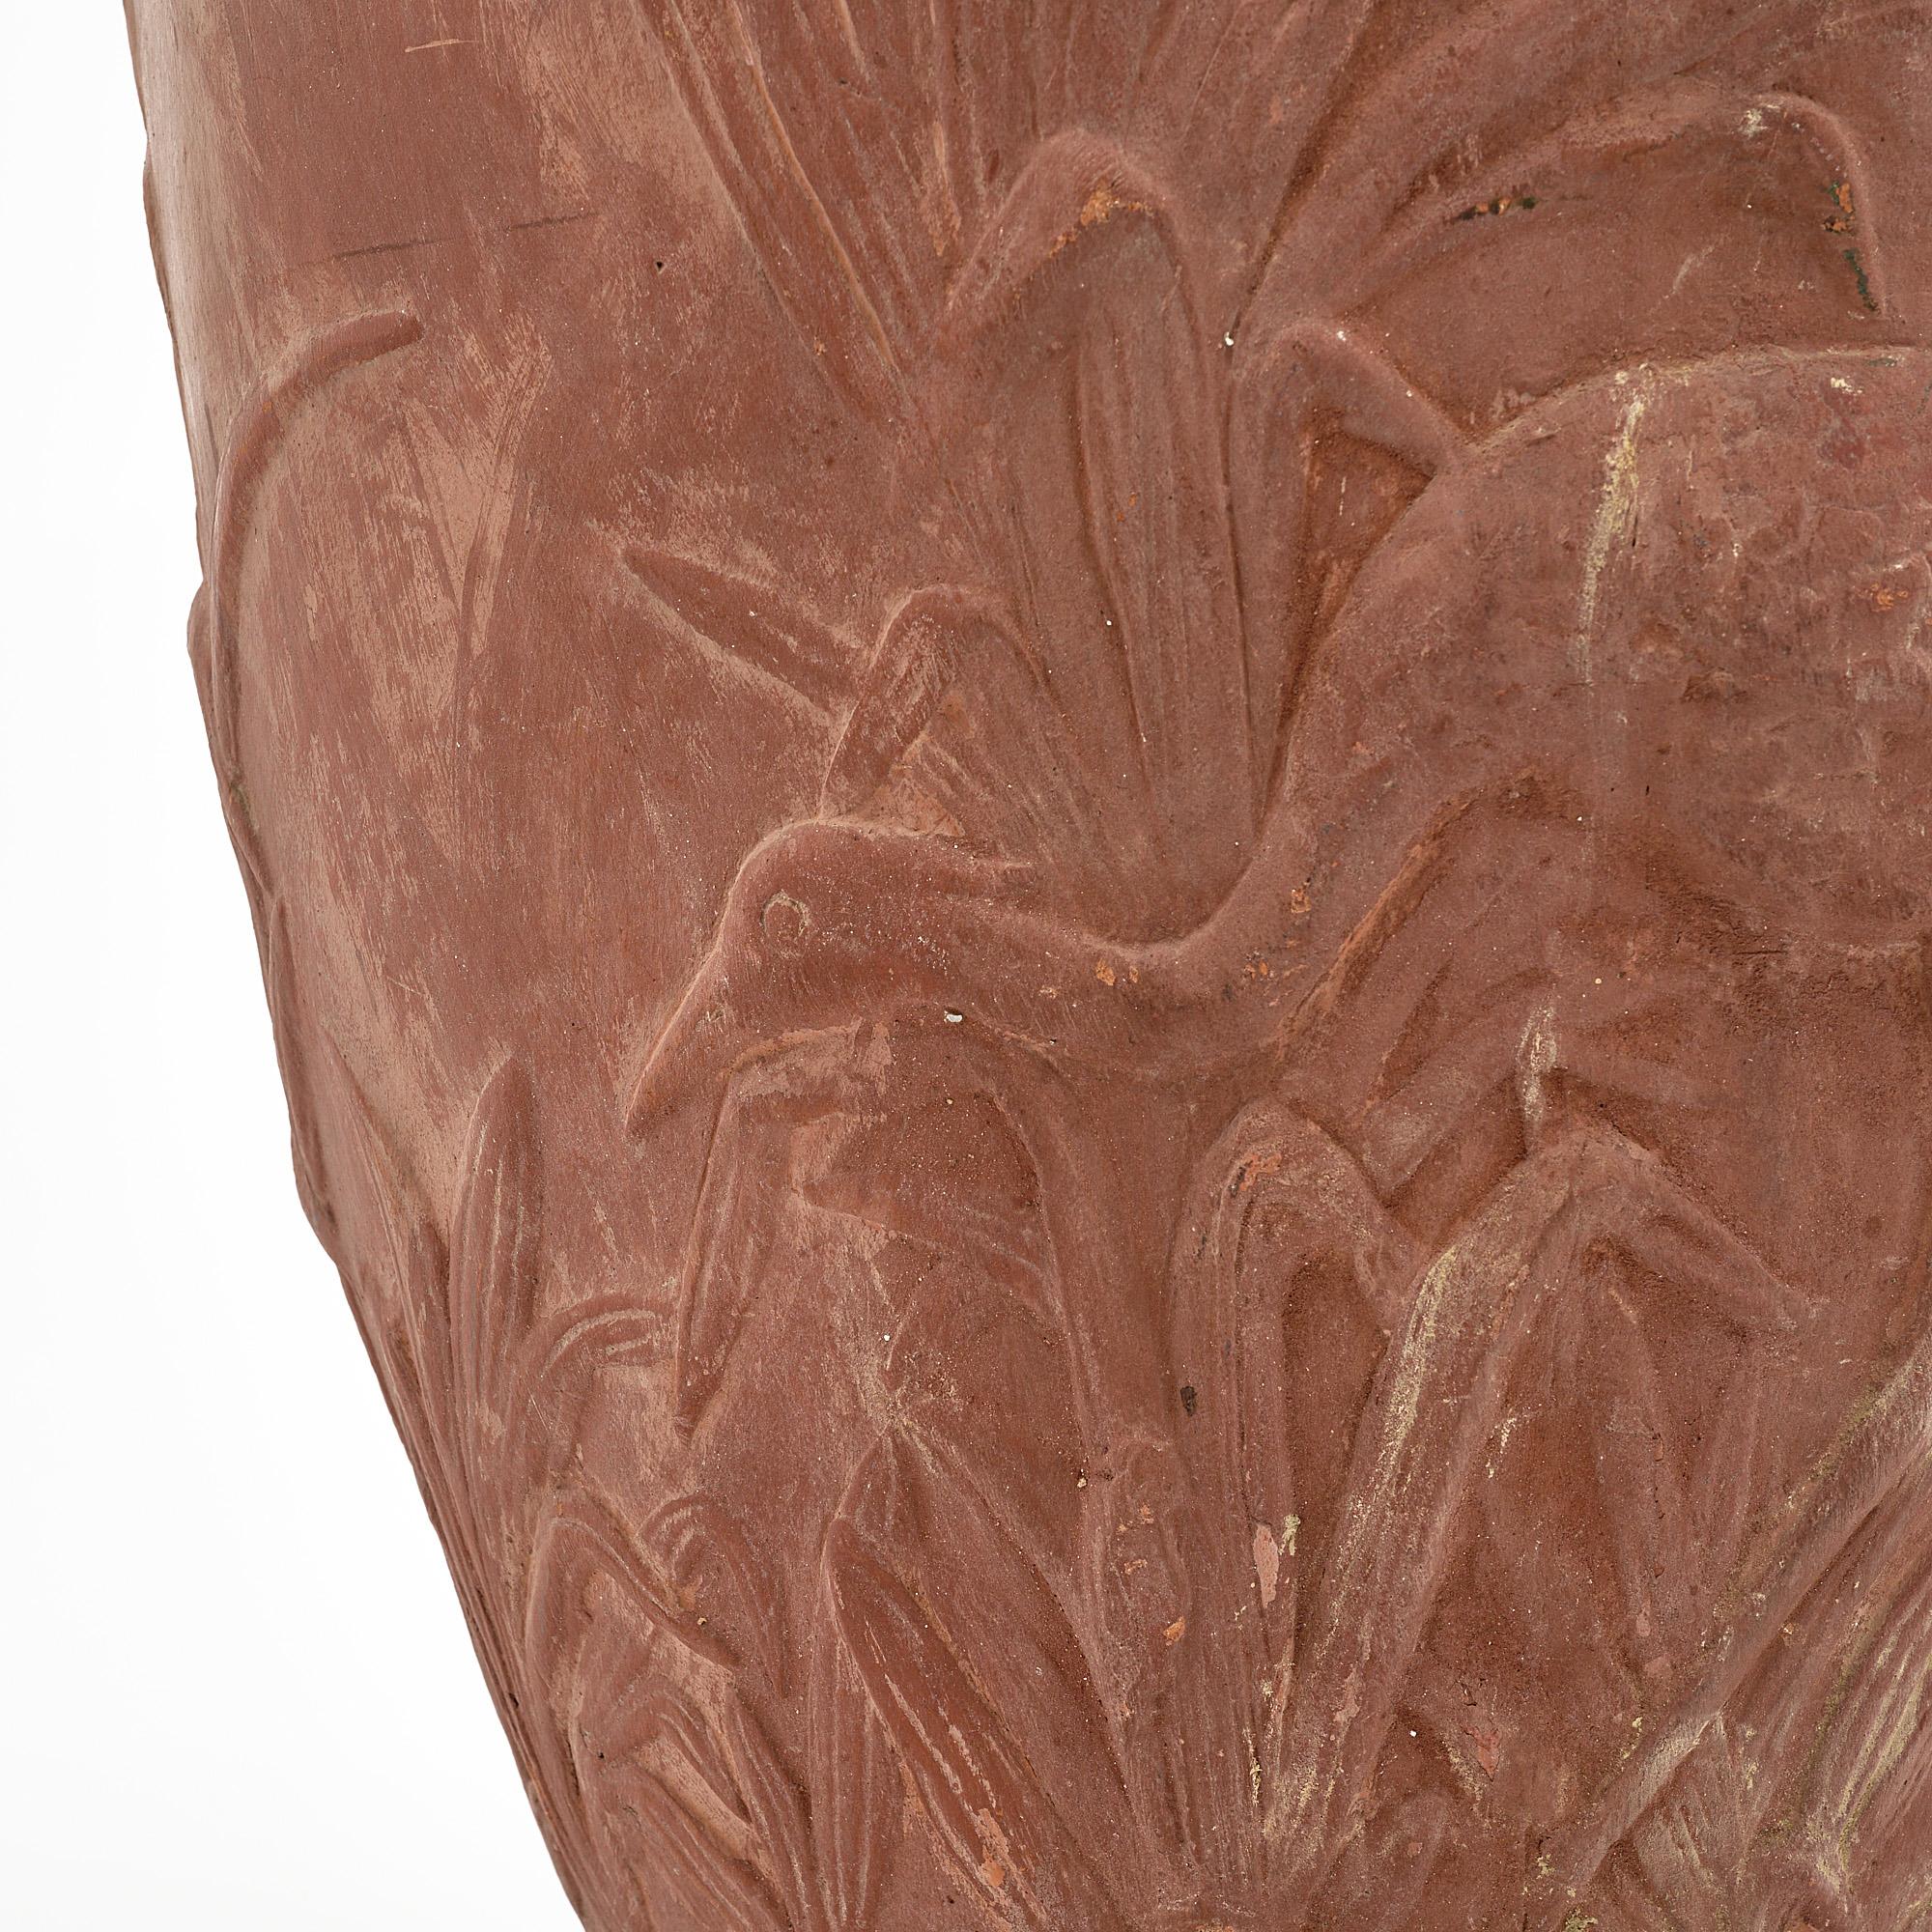 Large vase, vessel, French, from the Art Deco period made of chiseled terra cotta. This important piece of pottery in the manner of iconic Art Deco artist Jean Dunand features herons in marshy lands surrounded with bamboo foliage.